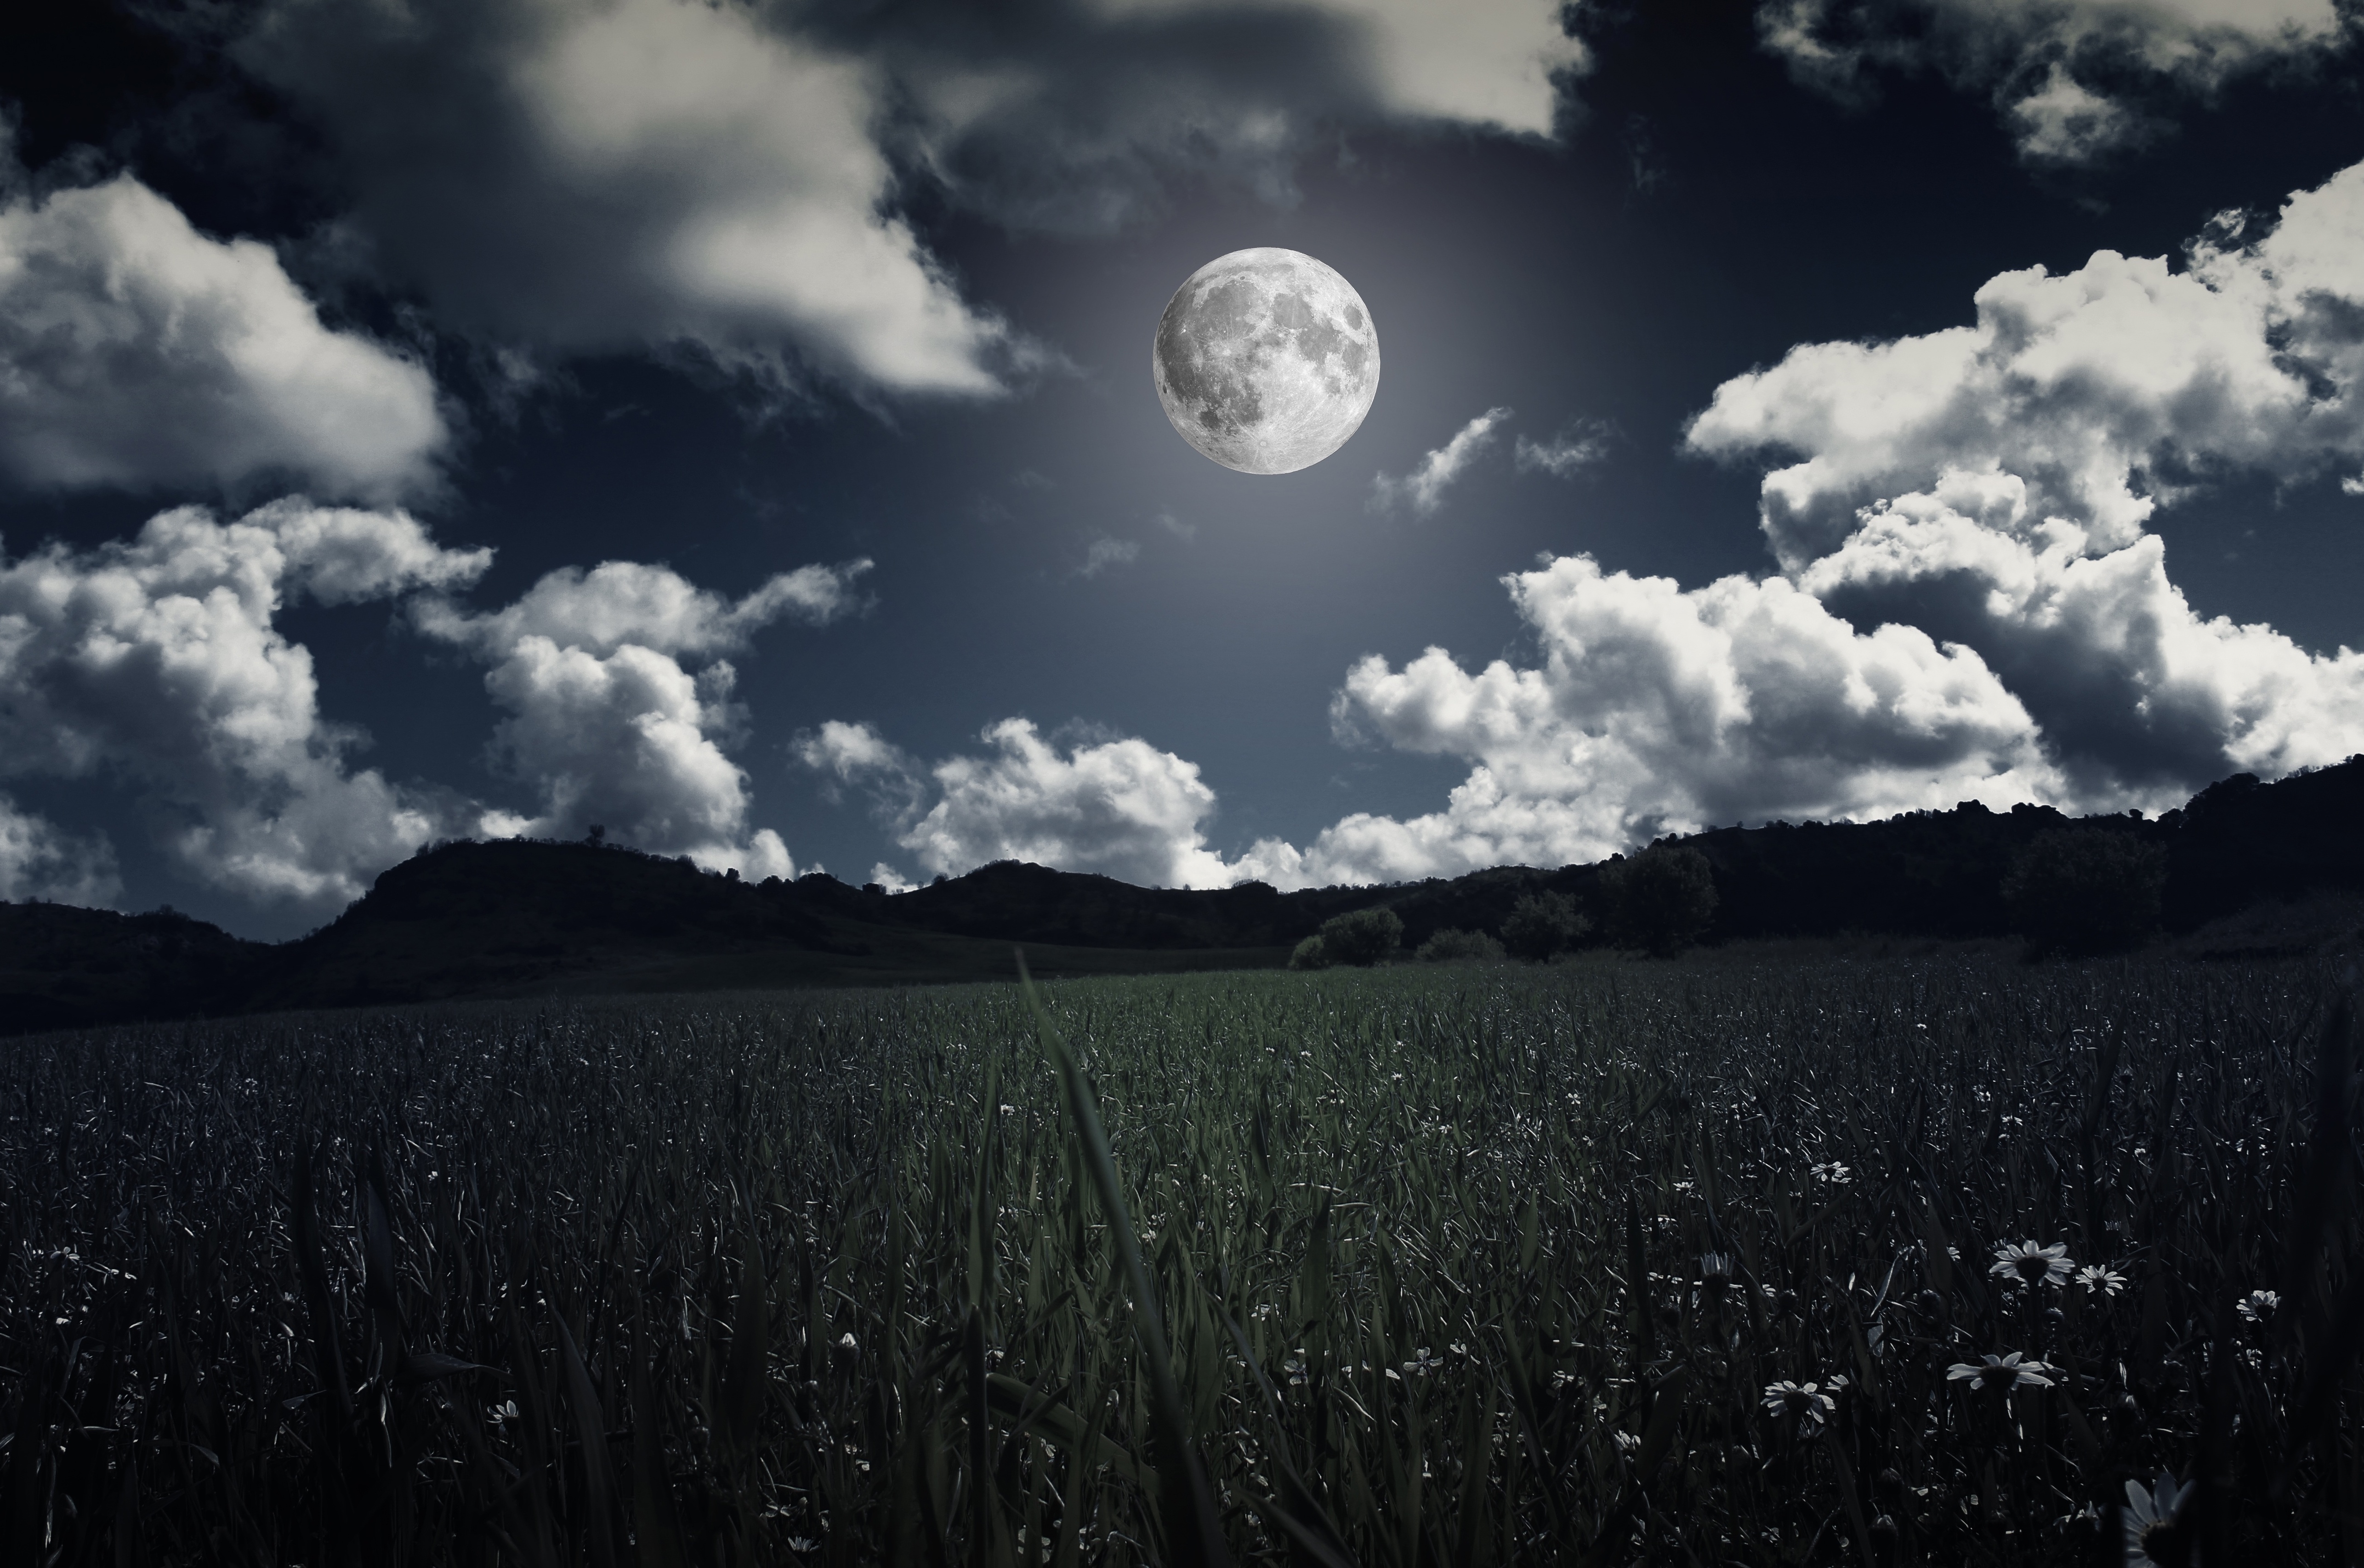 moon, full moon, grass, nature, clouds, field, photoshop phone background